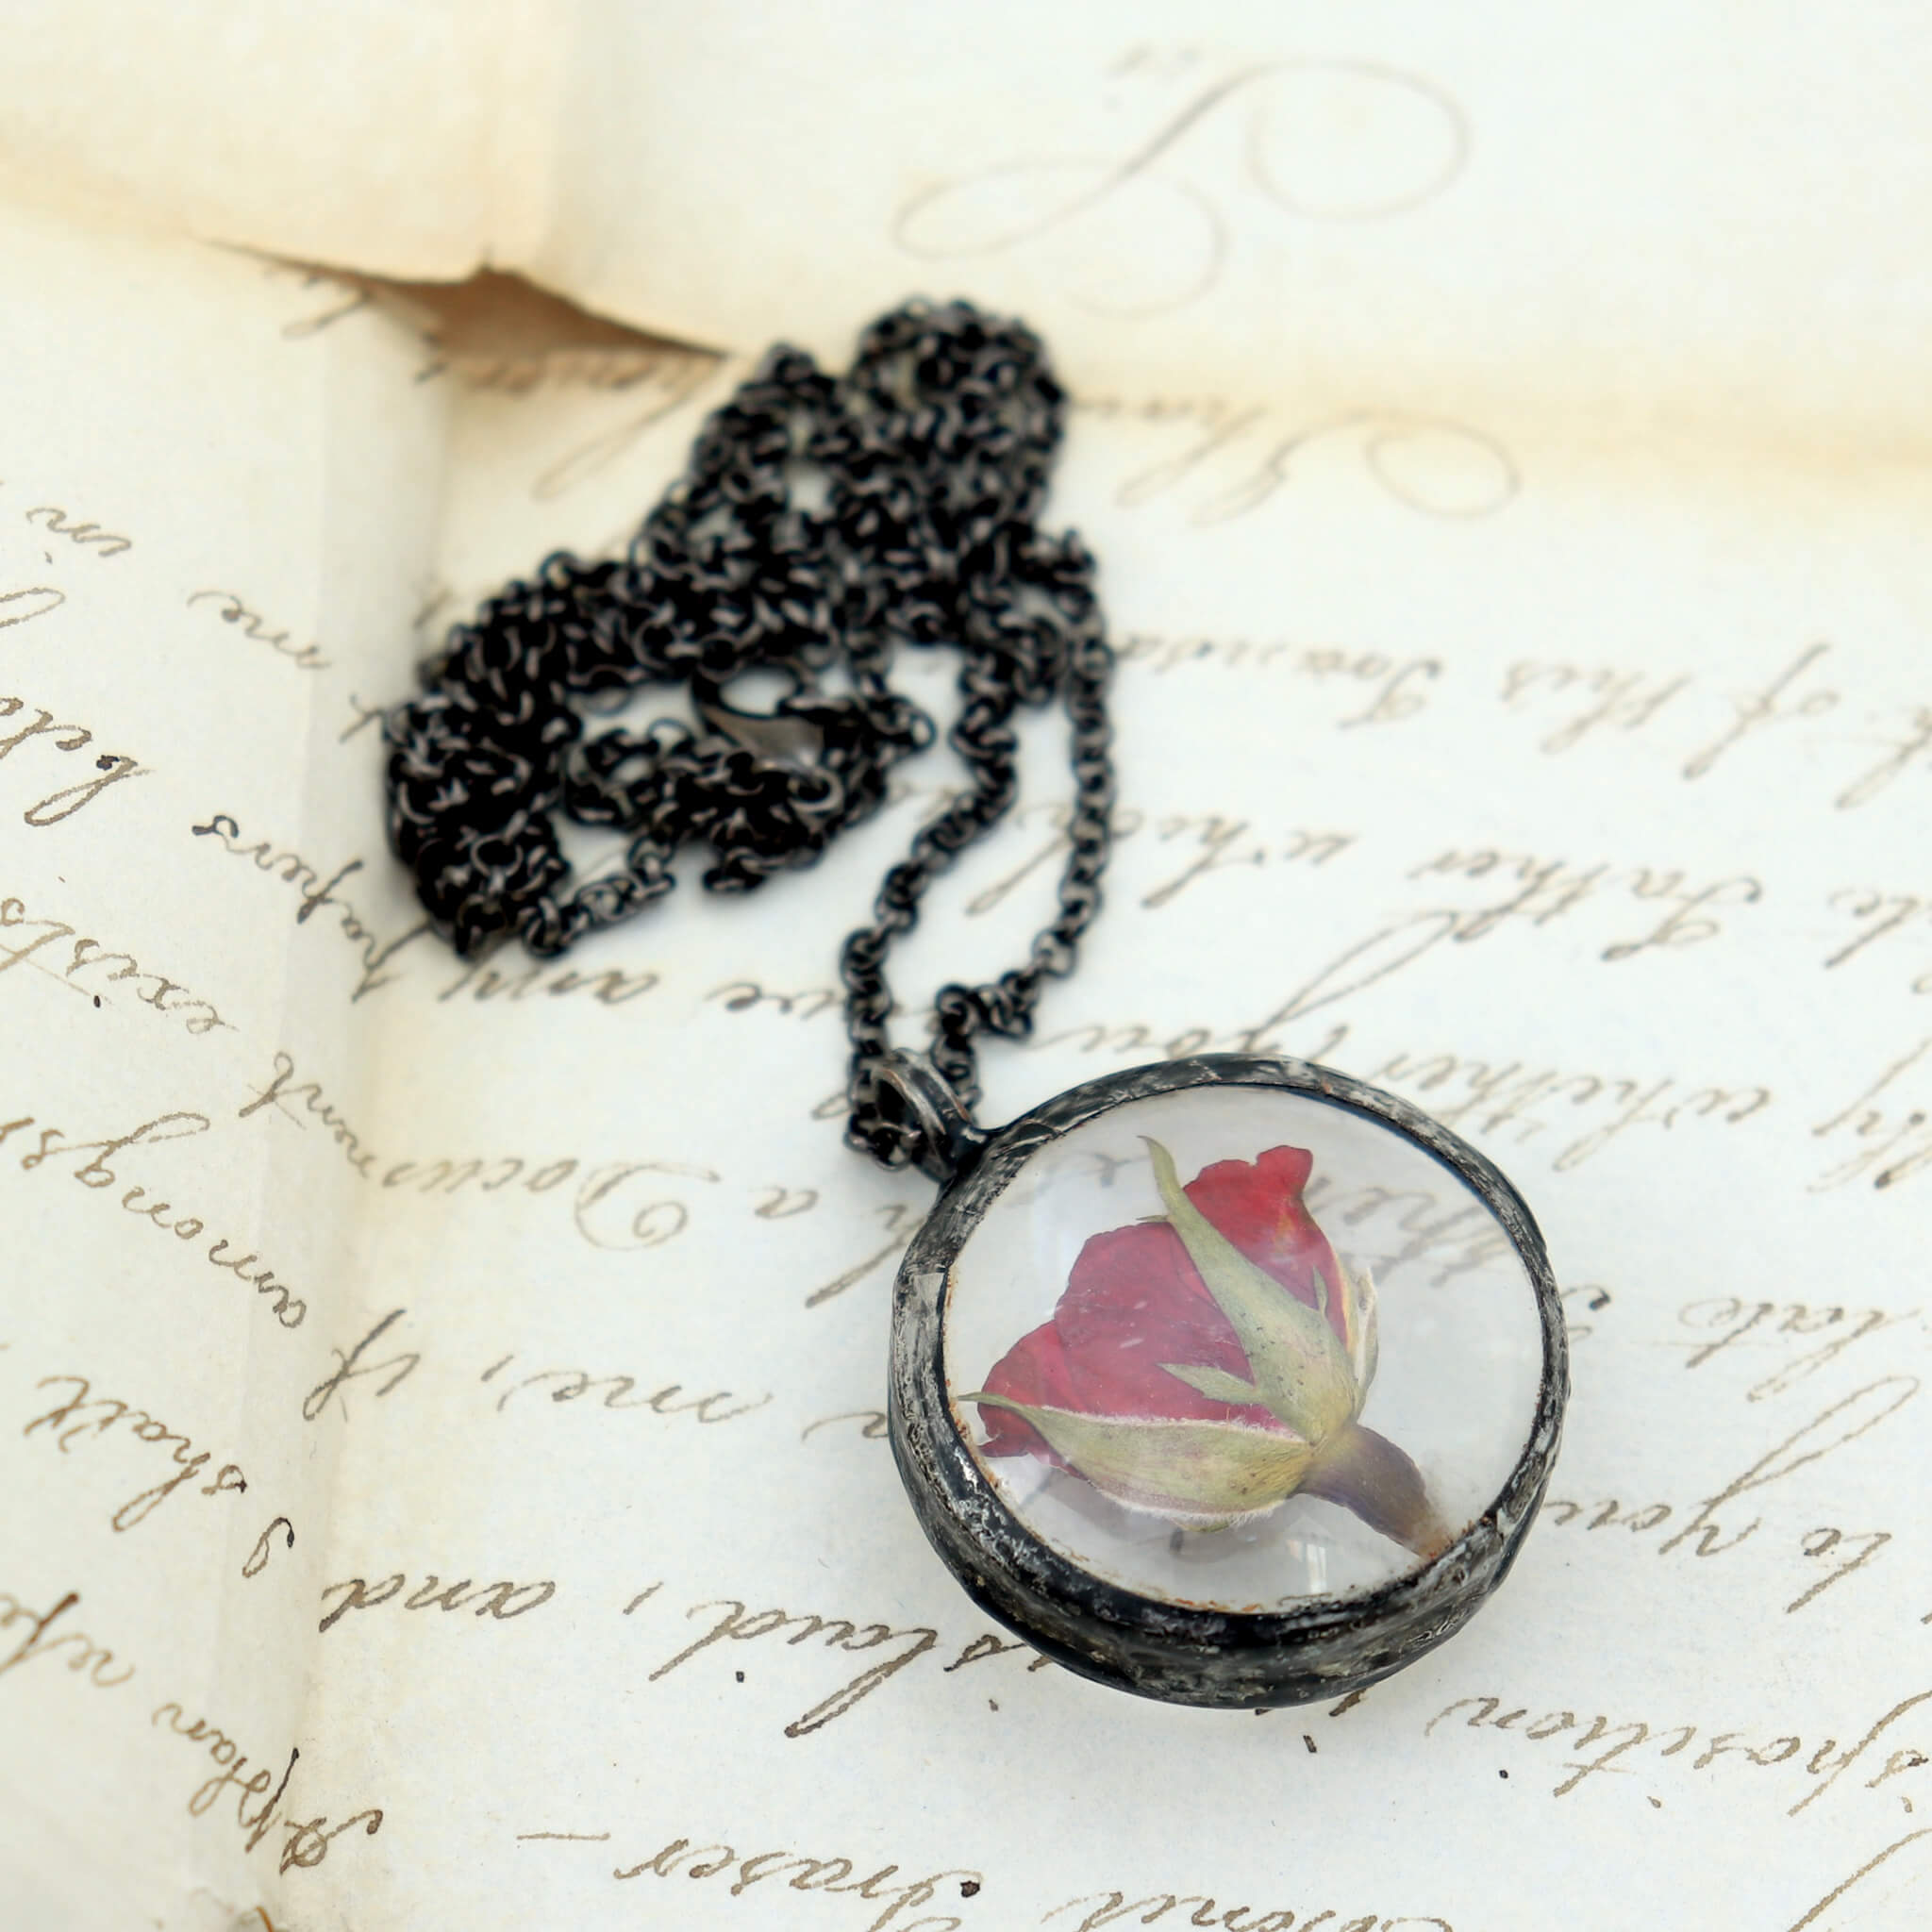 pressed rose pendant necklace lying on an old letter